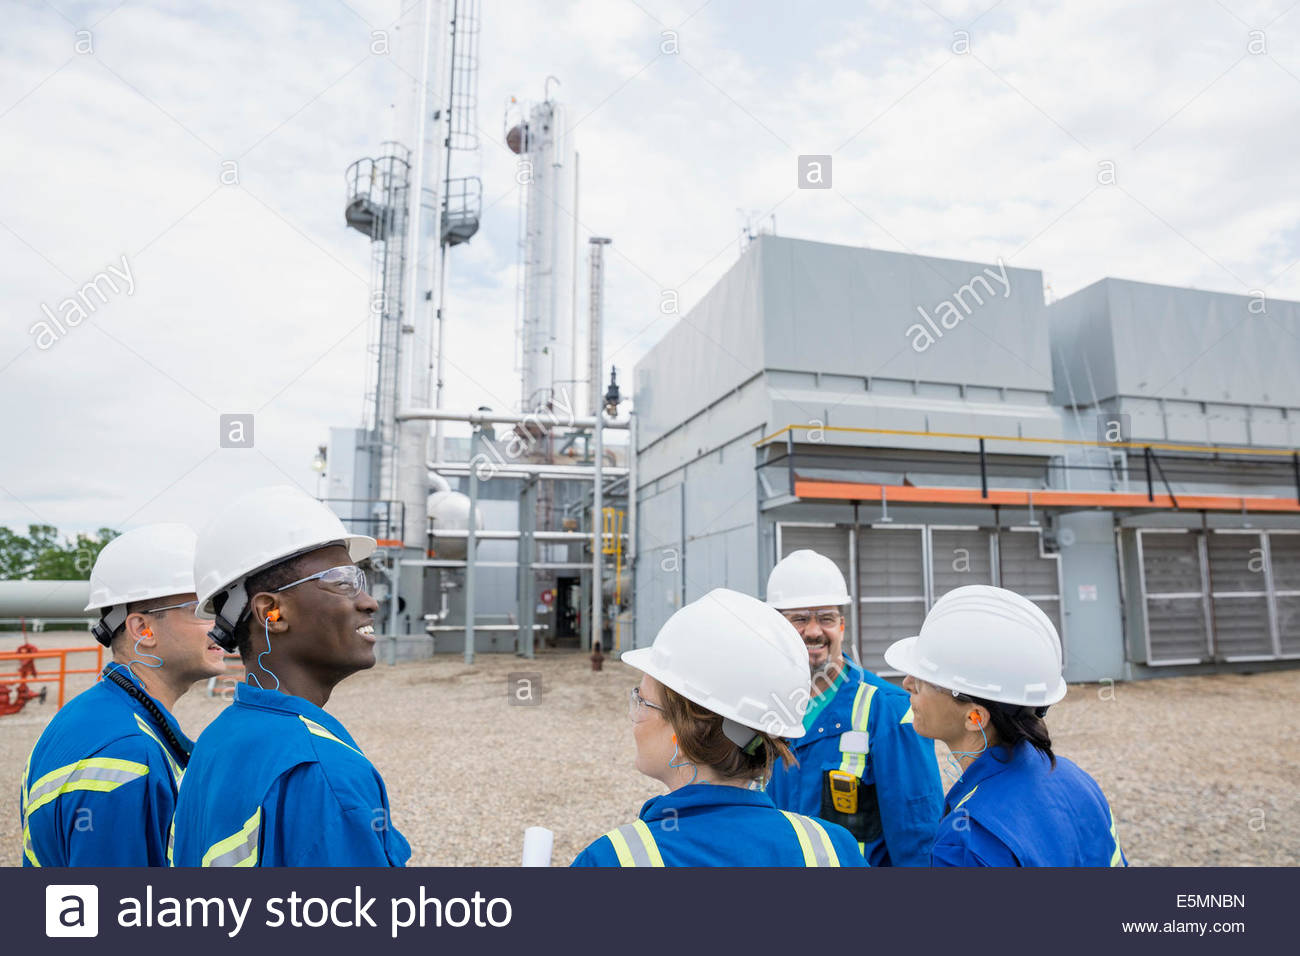 Workers meeting outside gas plant Stock Photo